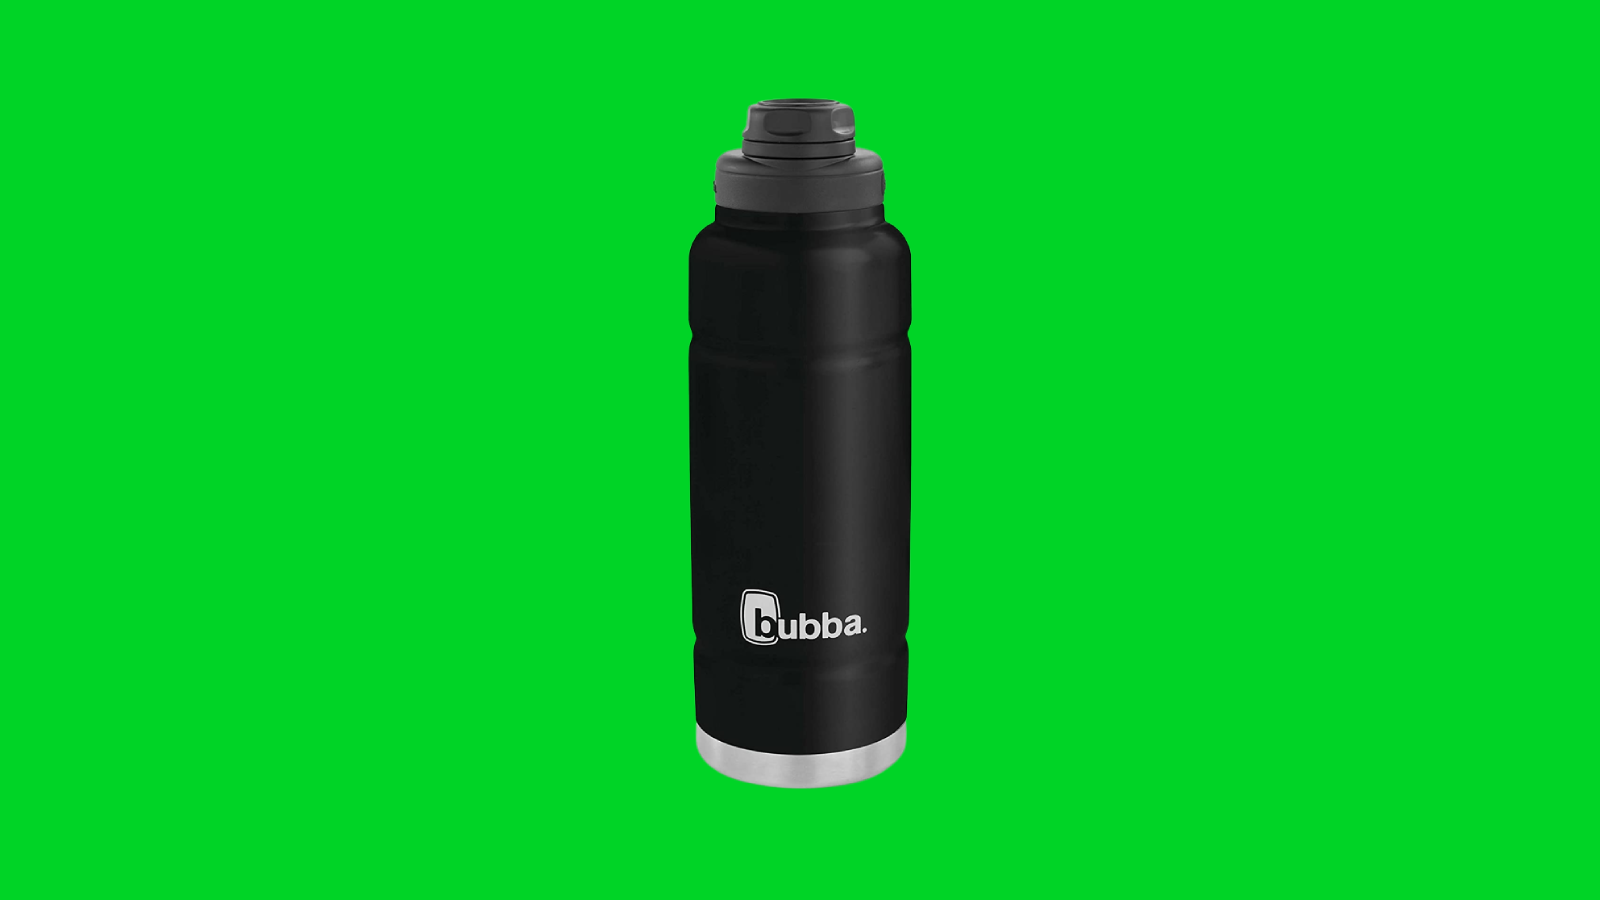 deals: Shop the best savings on Hydro Flask, TurboTax, and